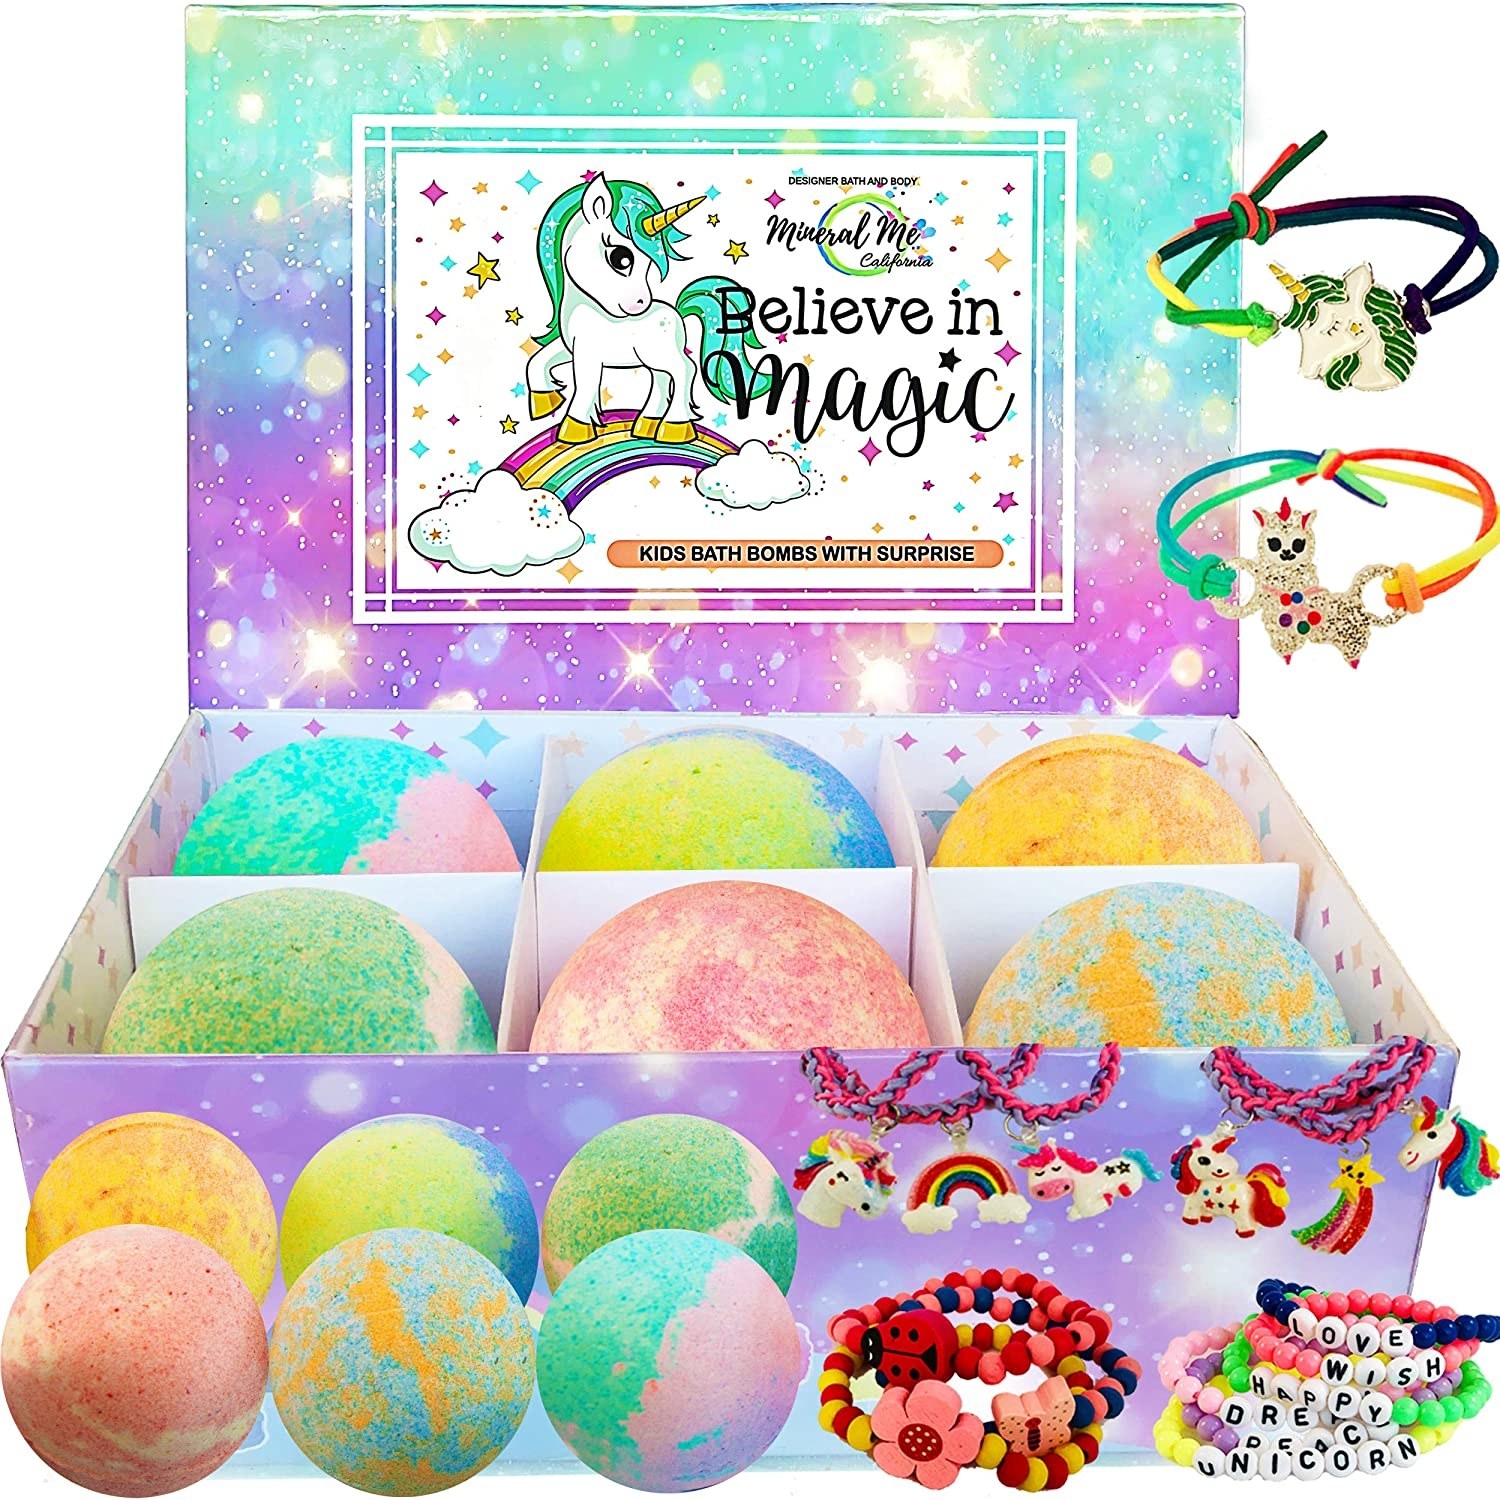 Six multicolored bath bombs in a box with a unicorn design and some bracelets